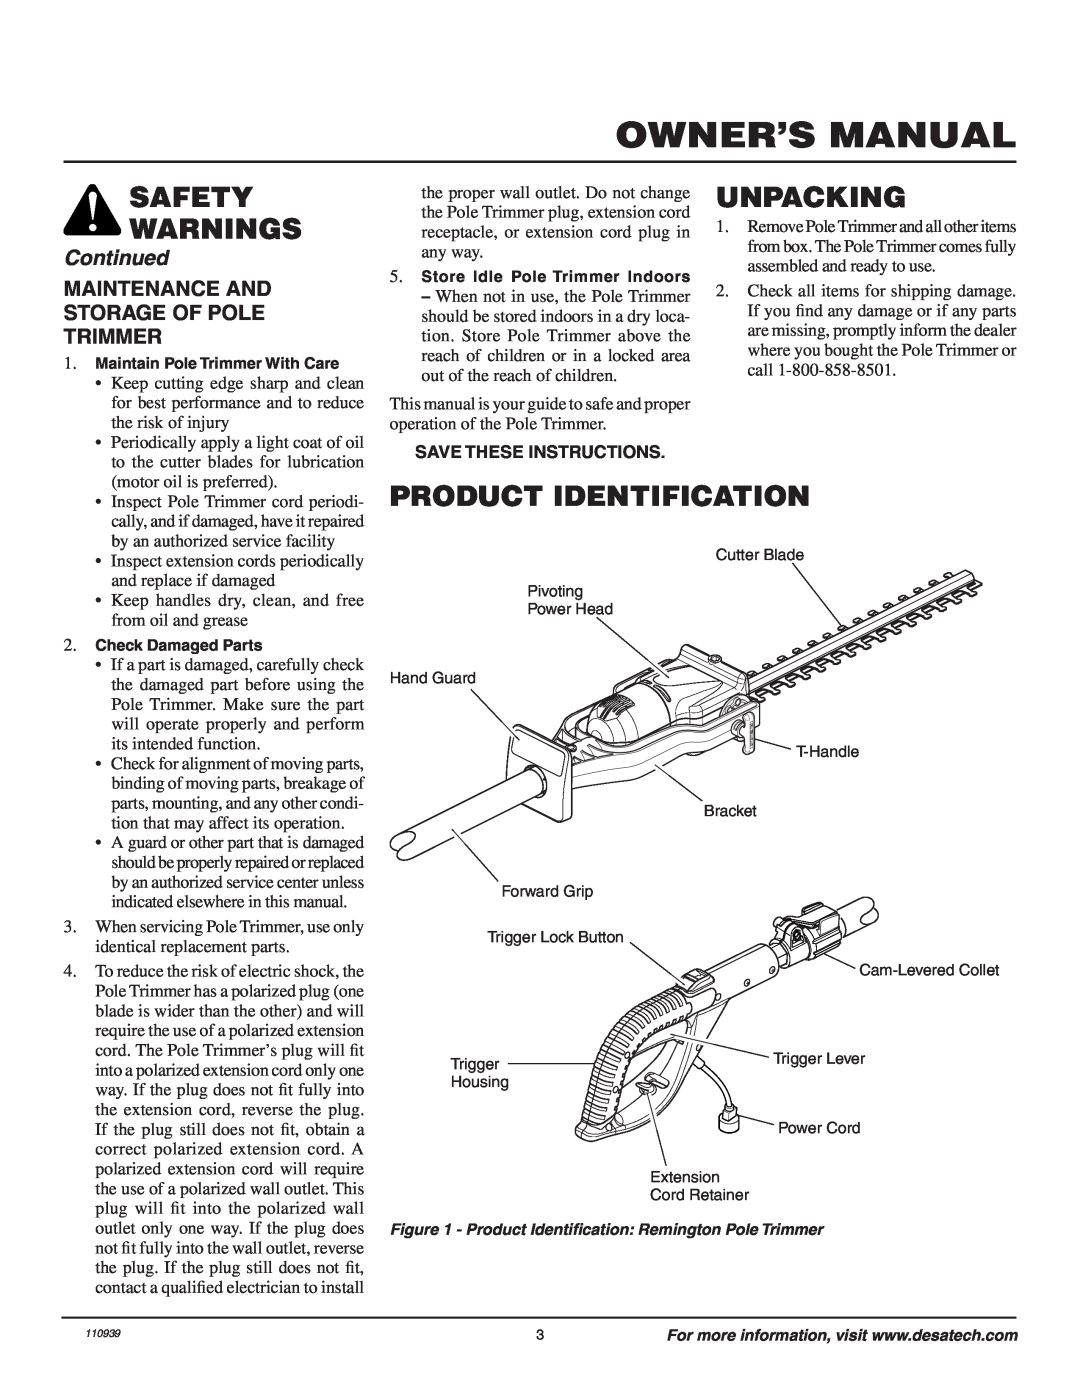 Remington 110946-01A owner manual Unpacking, Product Identification, Continued, Maintenance And Storage Of Pole Trimmer 